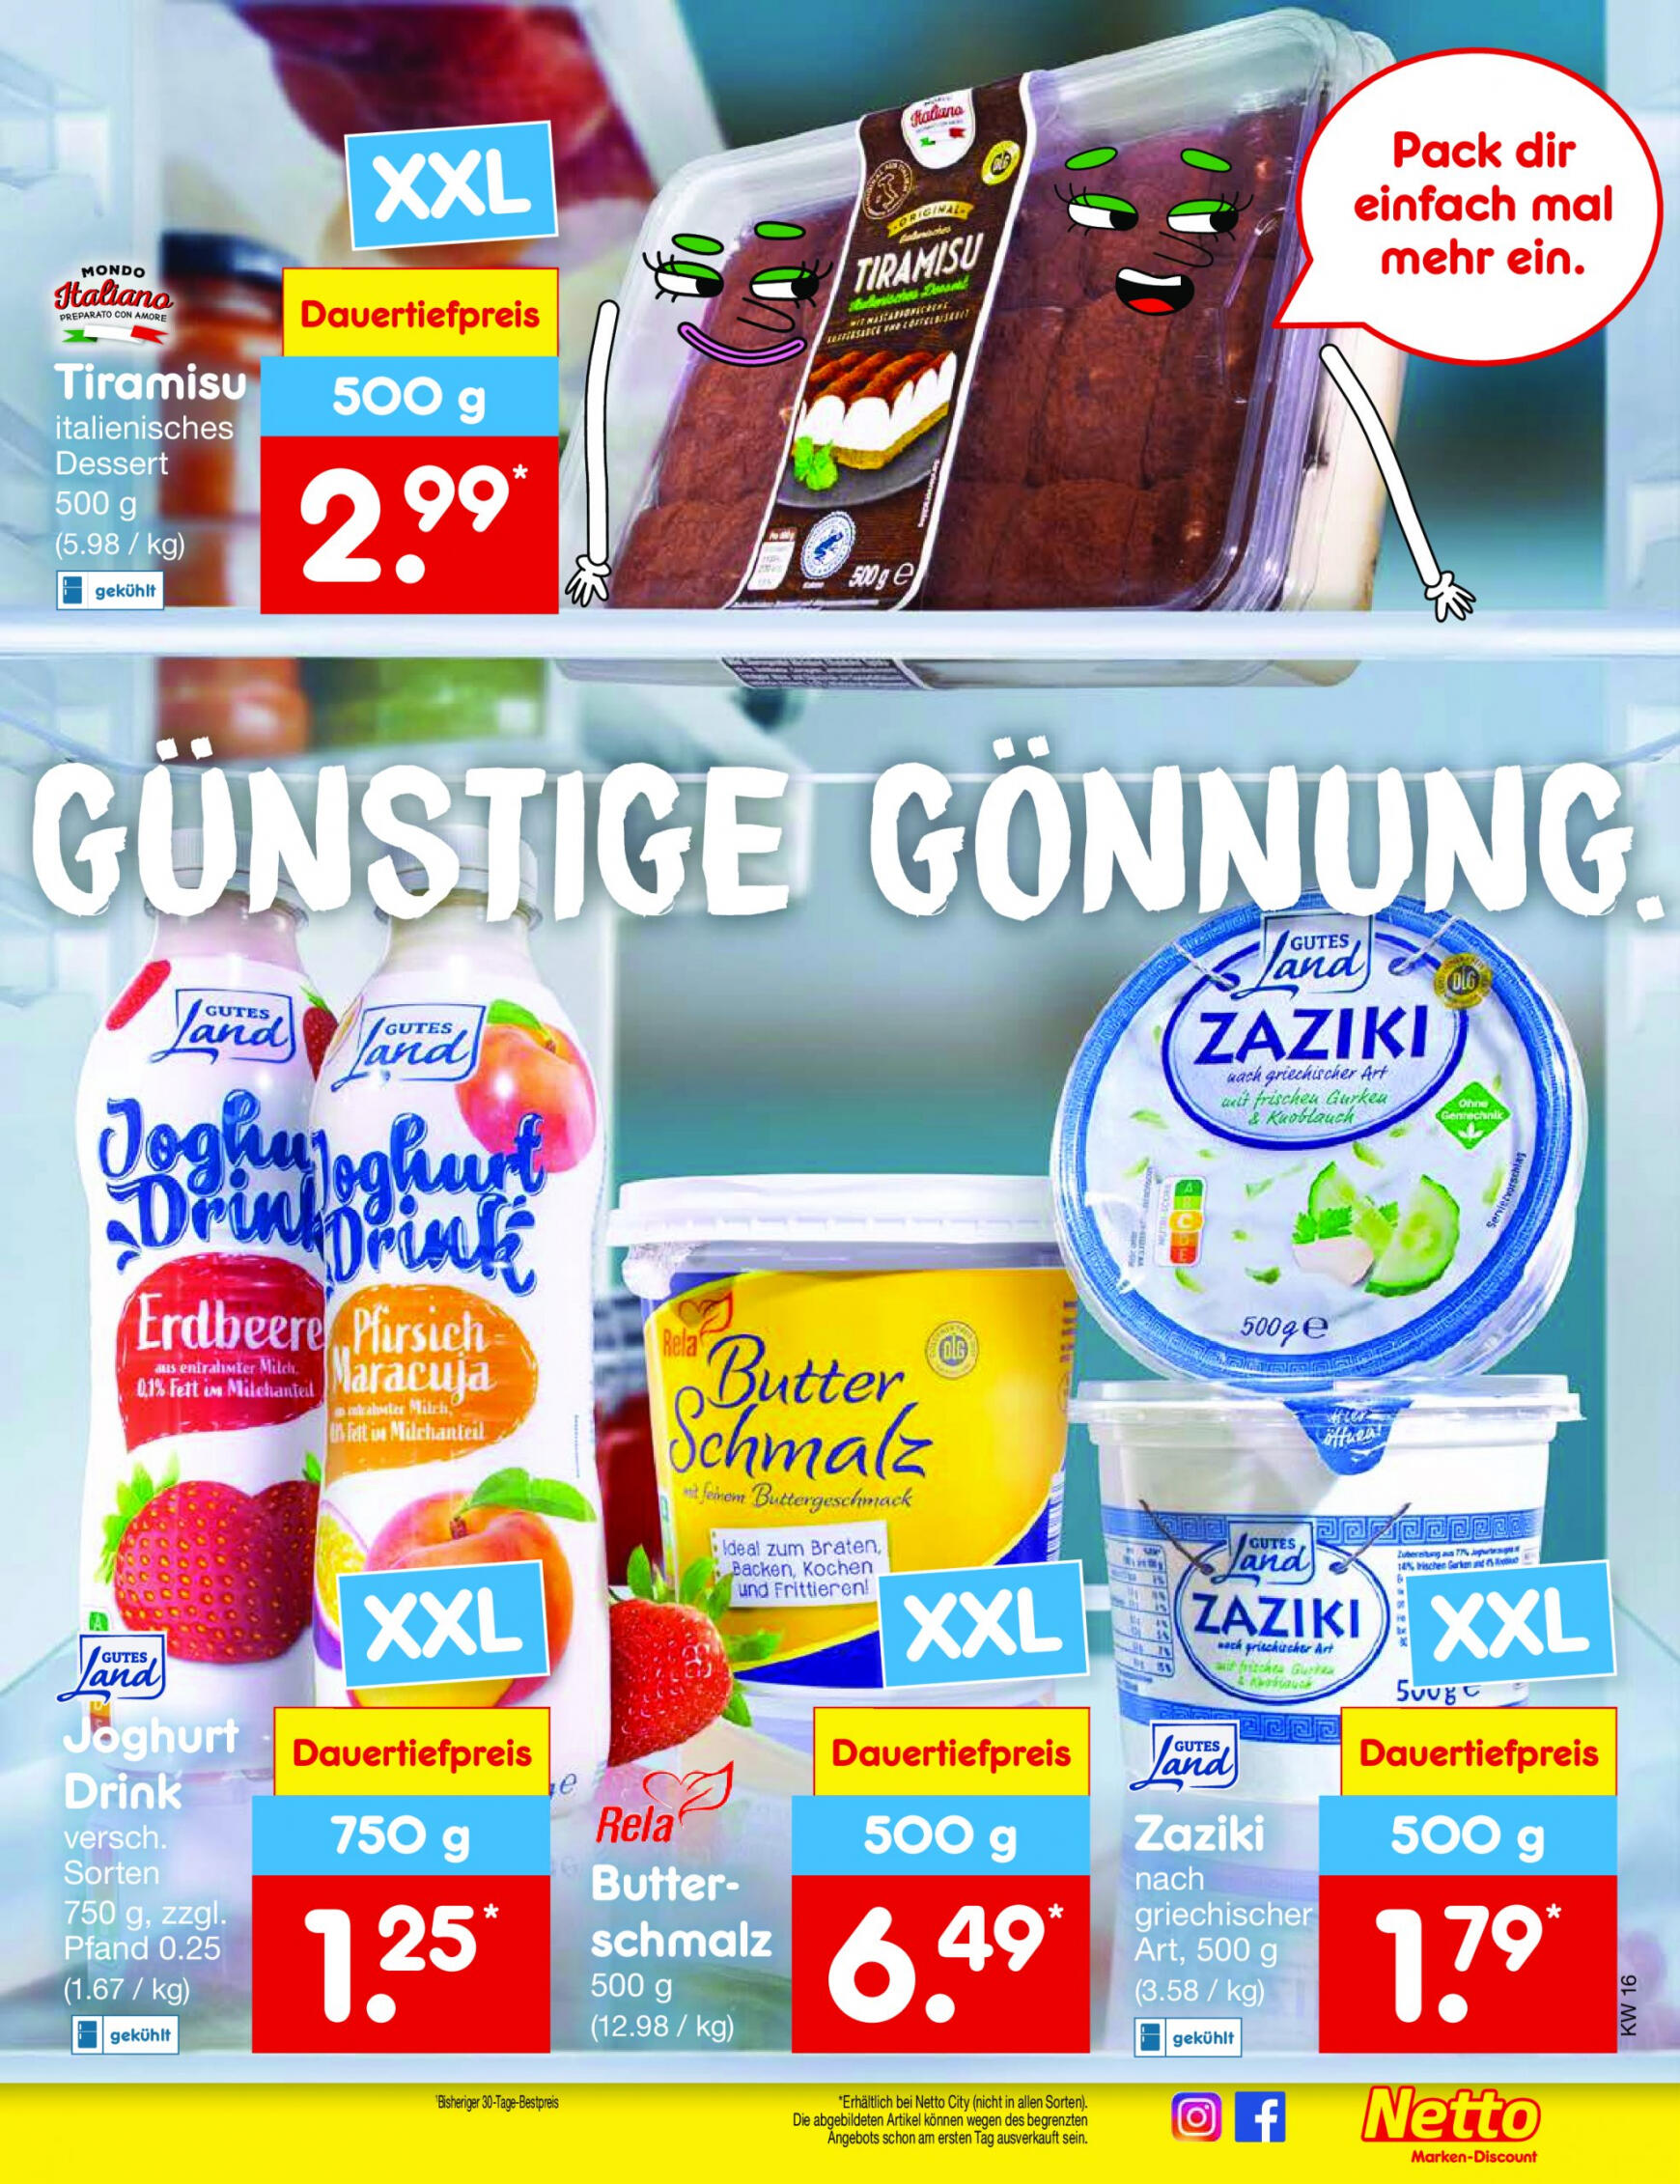 netto - Flyer Netto aktuell 15.04. - 20.04. - page: 17